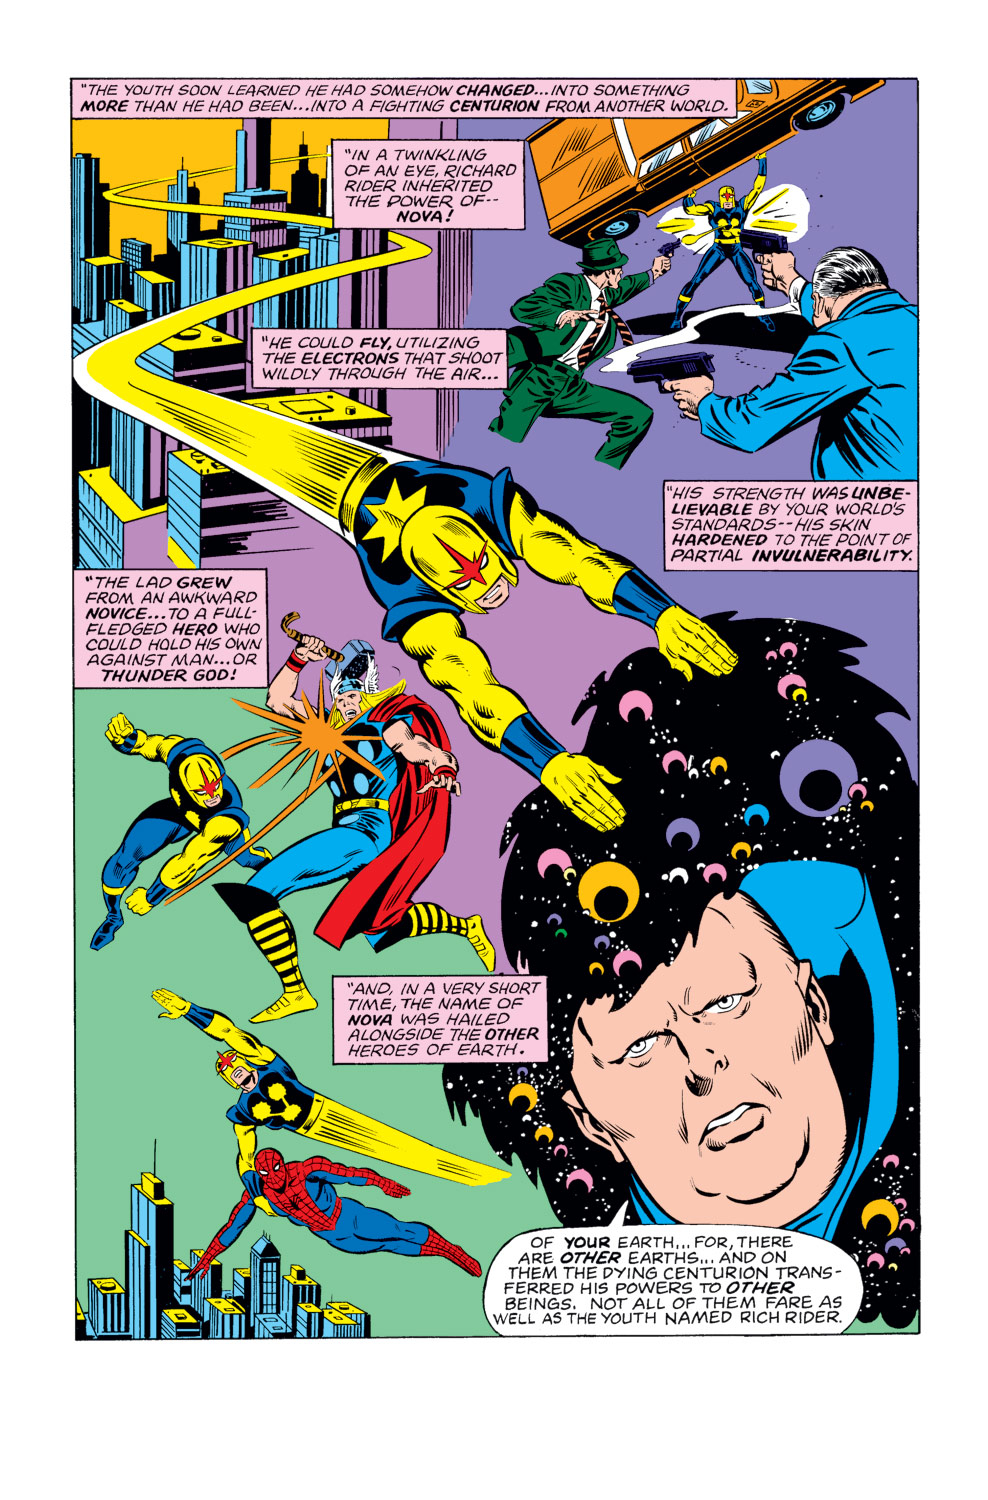 What If? (1977) issue 15 - Nova had been four other people - Page 4